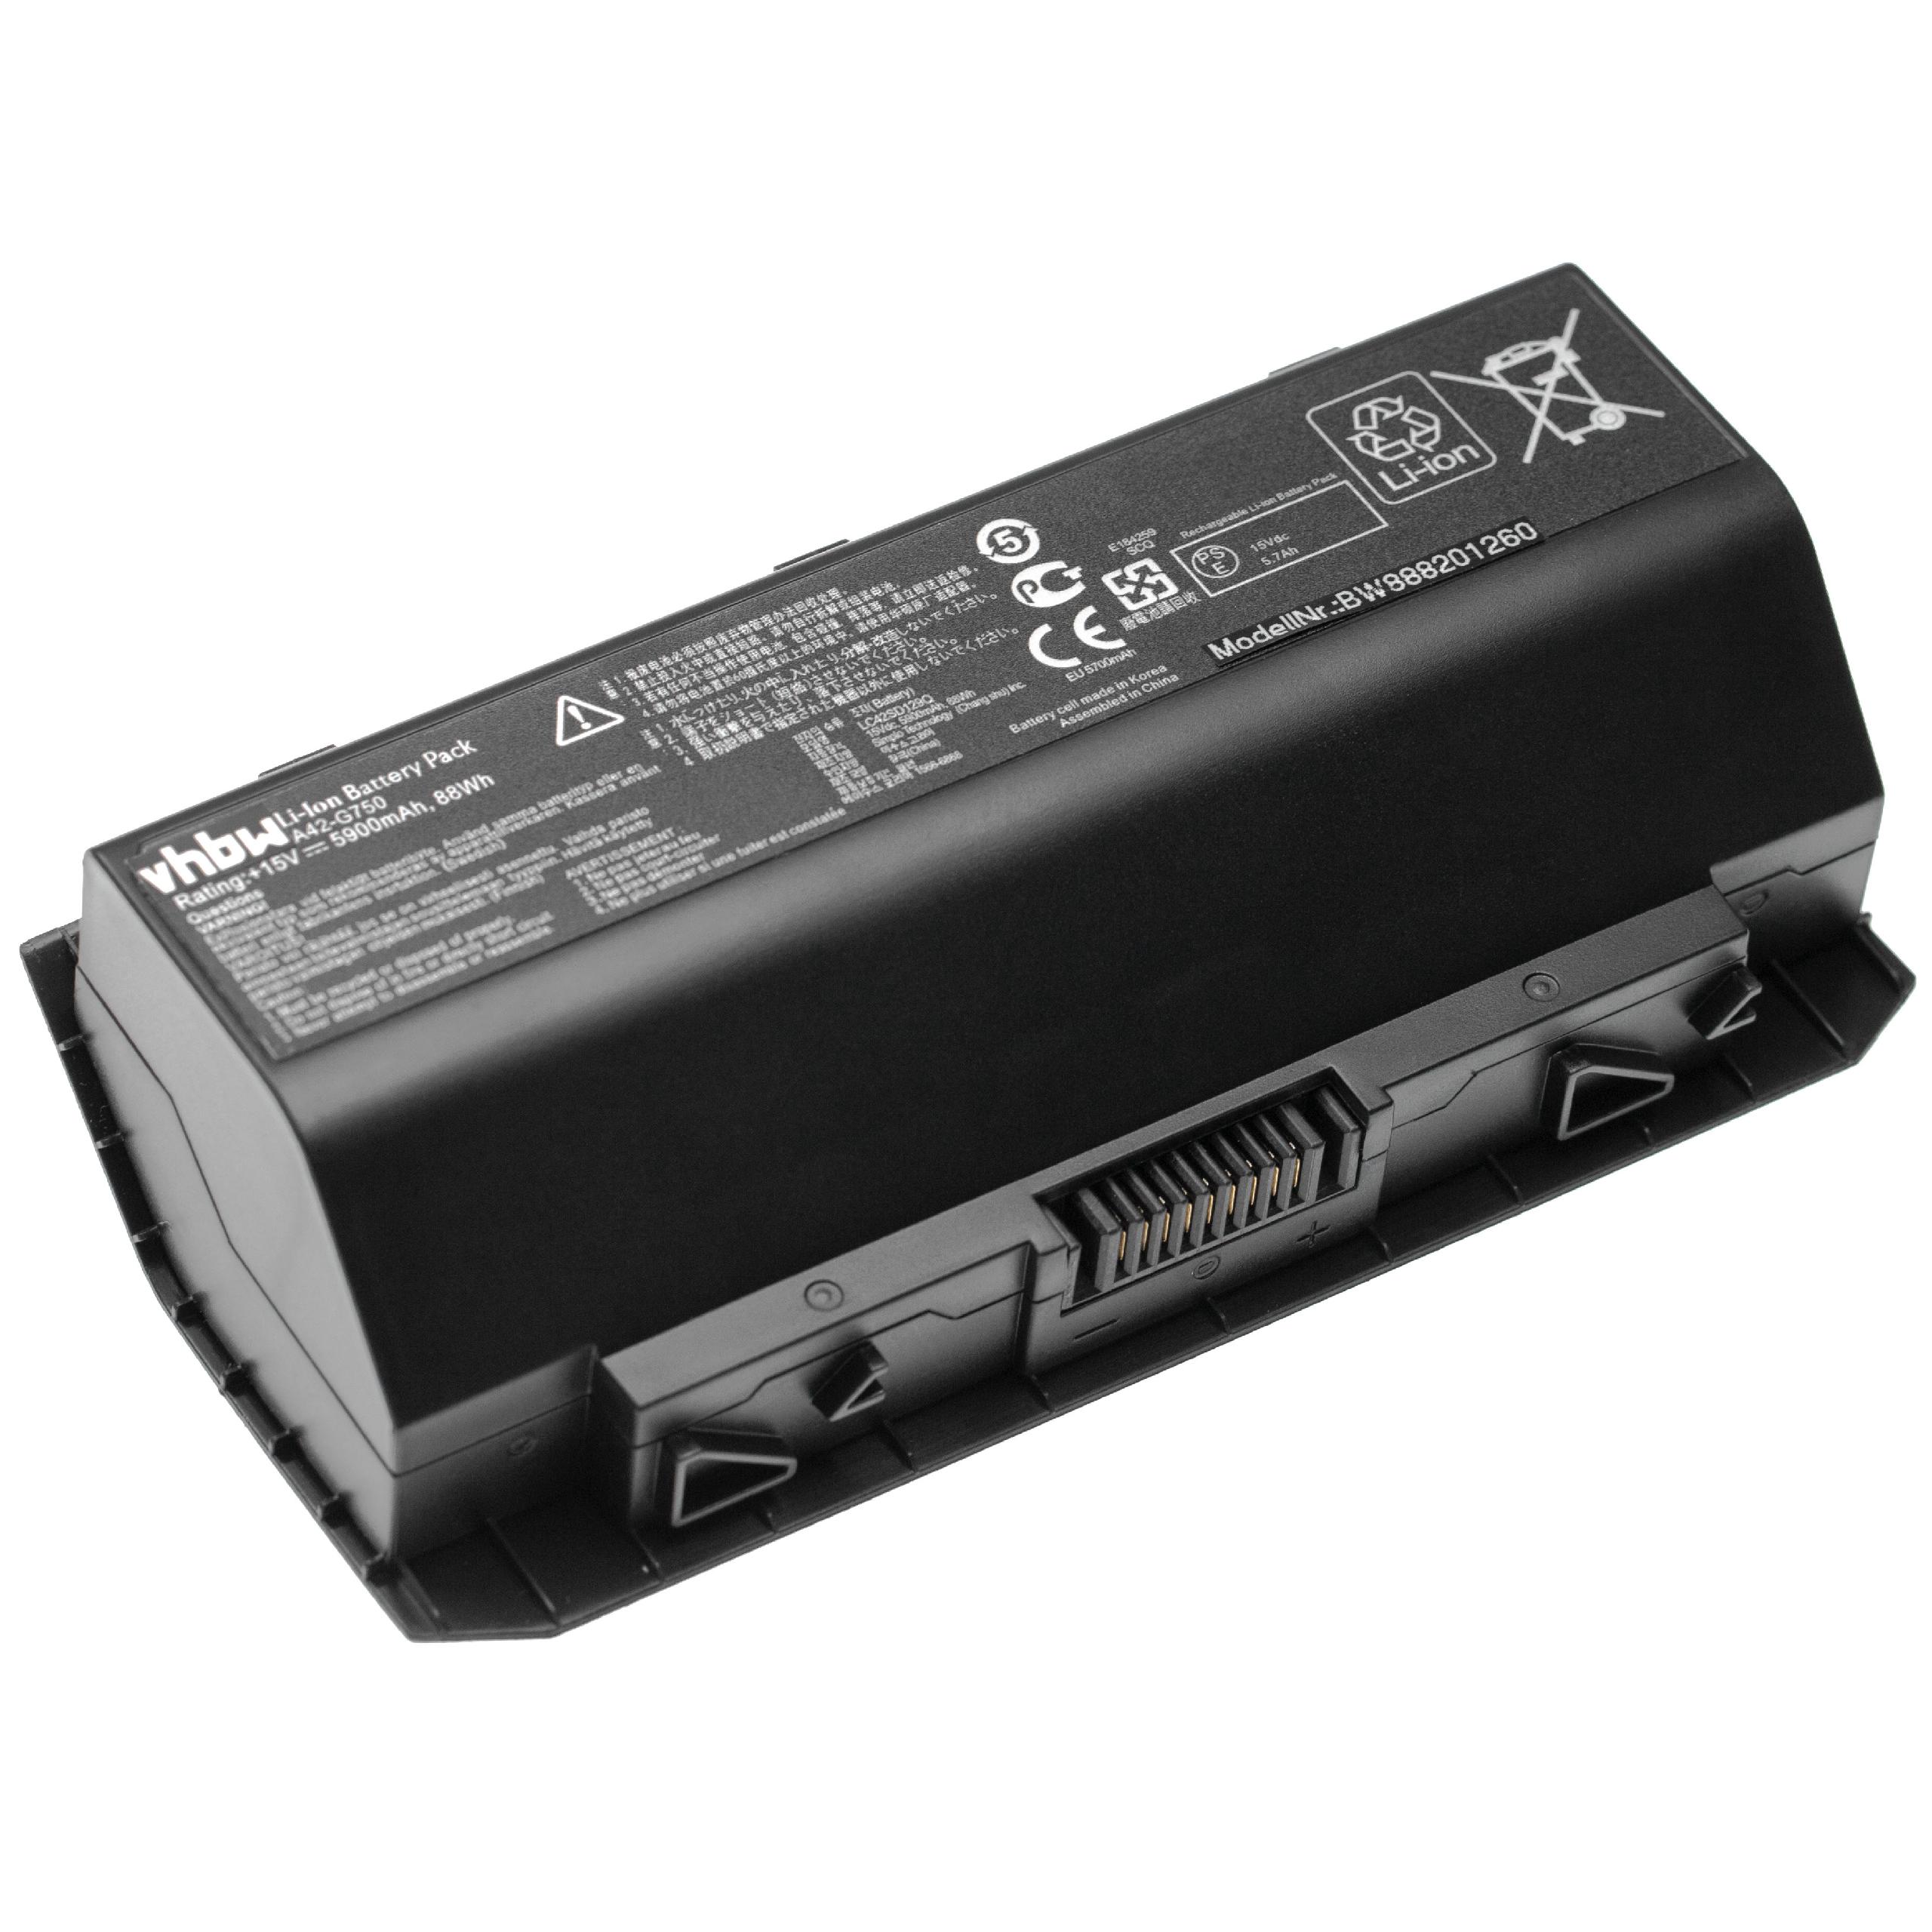 Notebook Battery Replacement for Asus A42-G750 - 5900mAh 15V Li-polymer, black